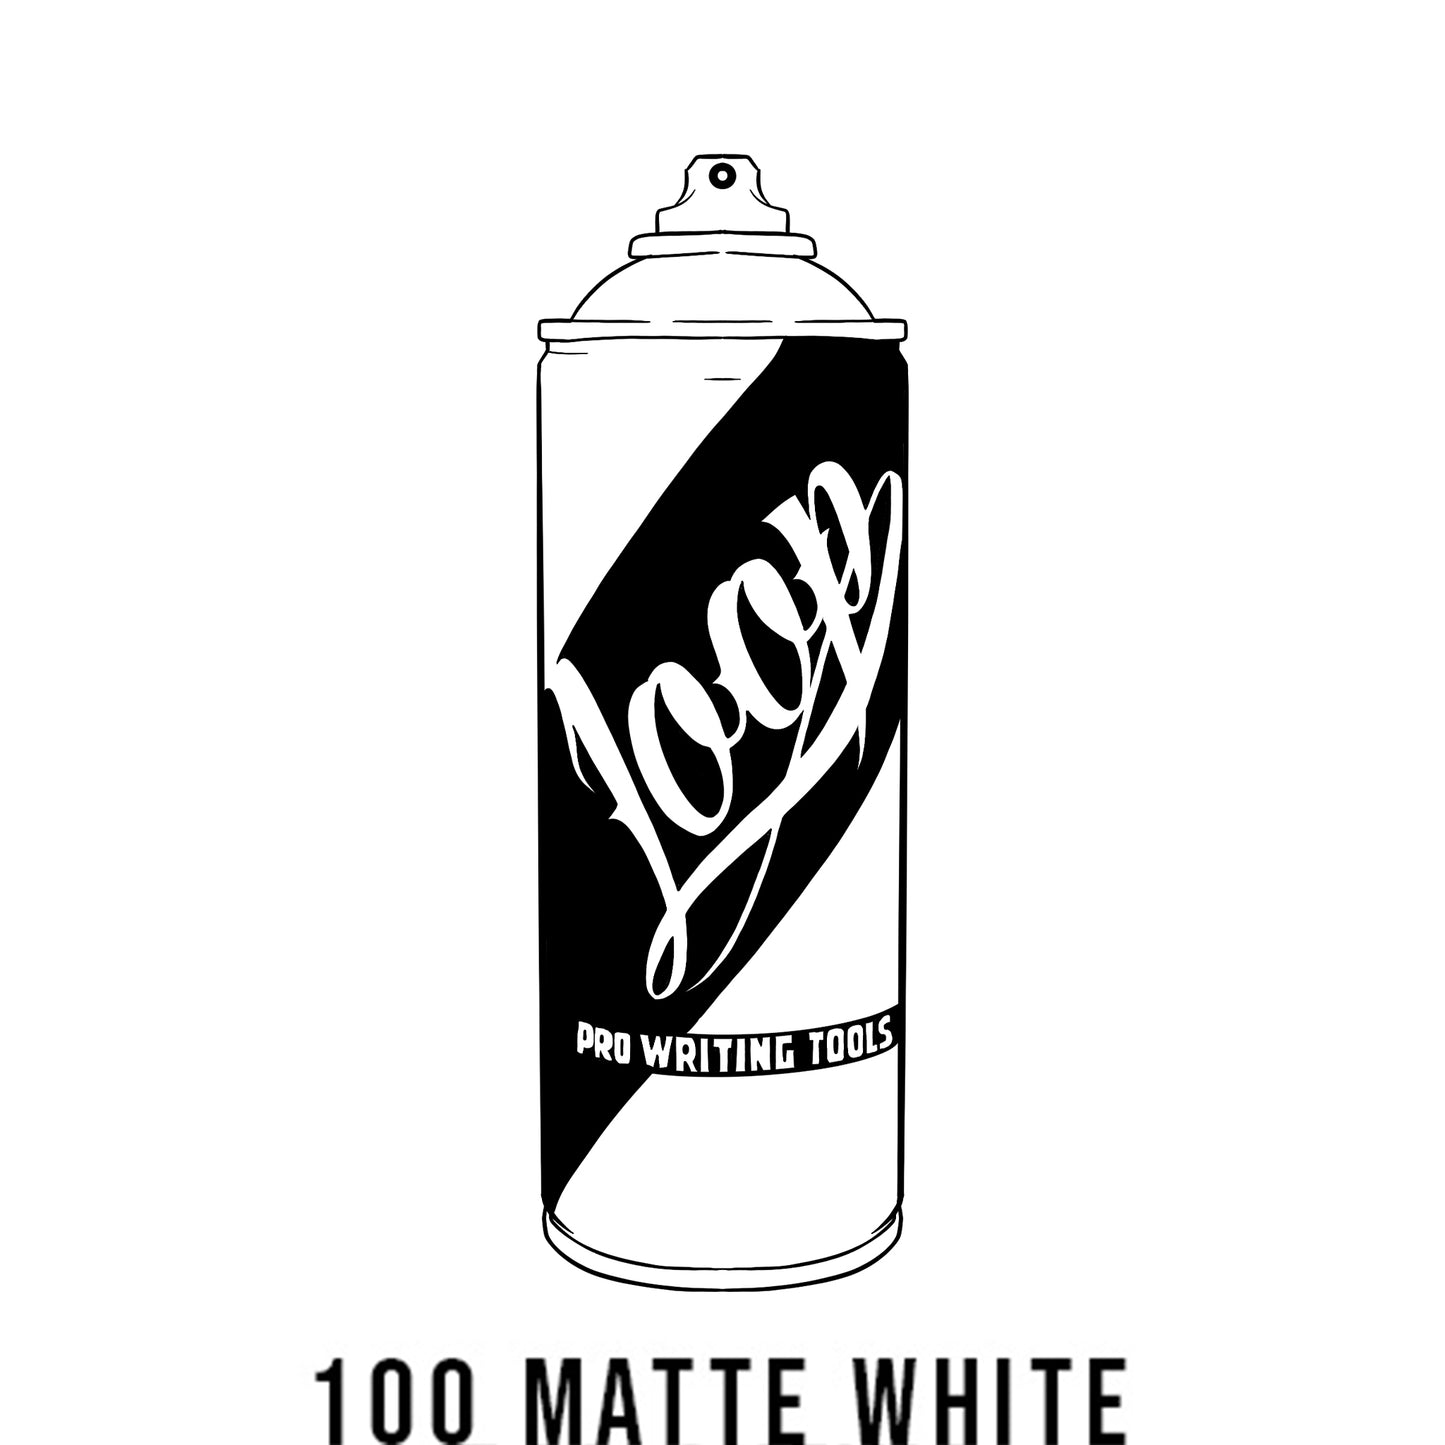 A black outline drawing of a white spray paint can with the word "Loop" written on the face in script. The background is blank with the words "100 Matte White" at the bottom.